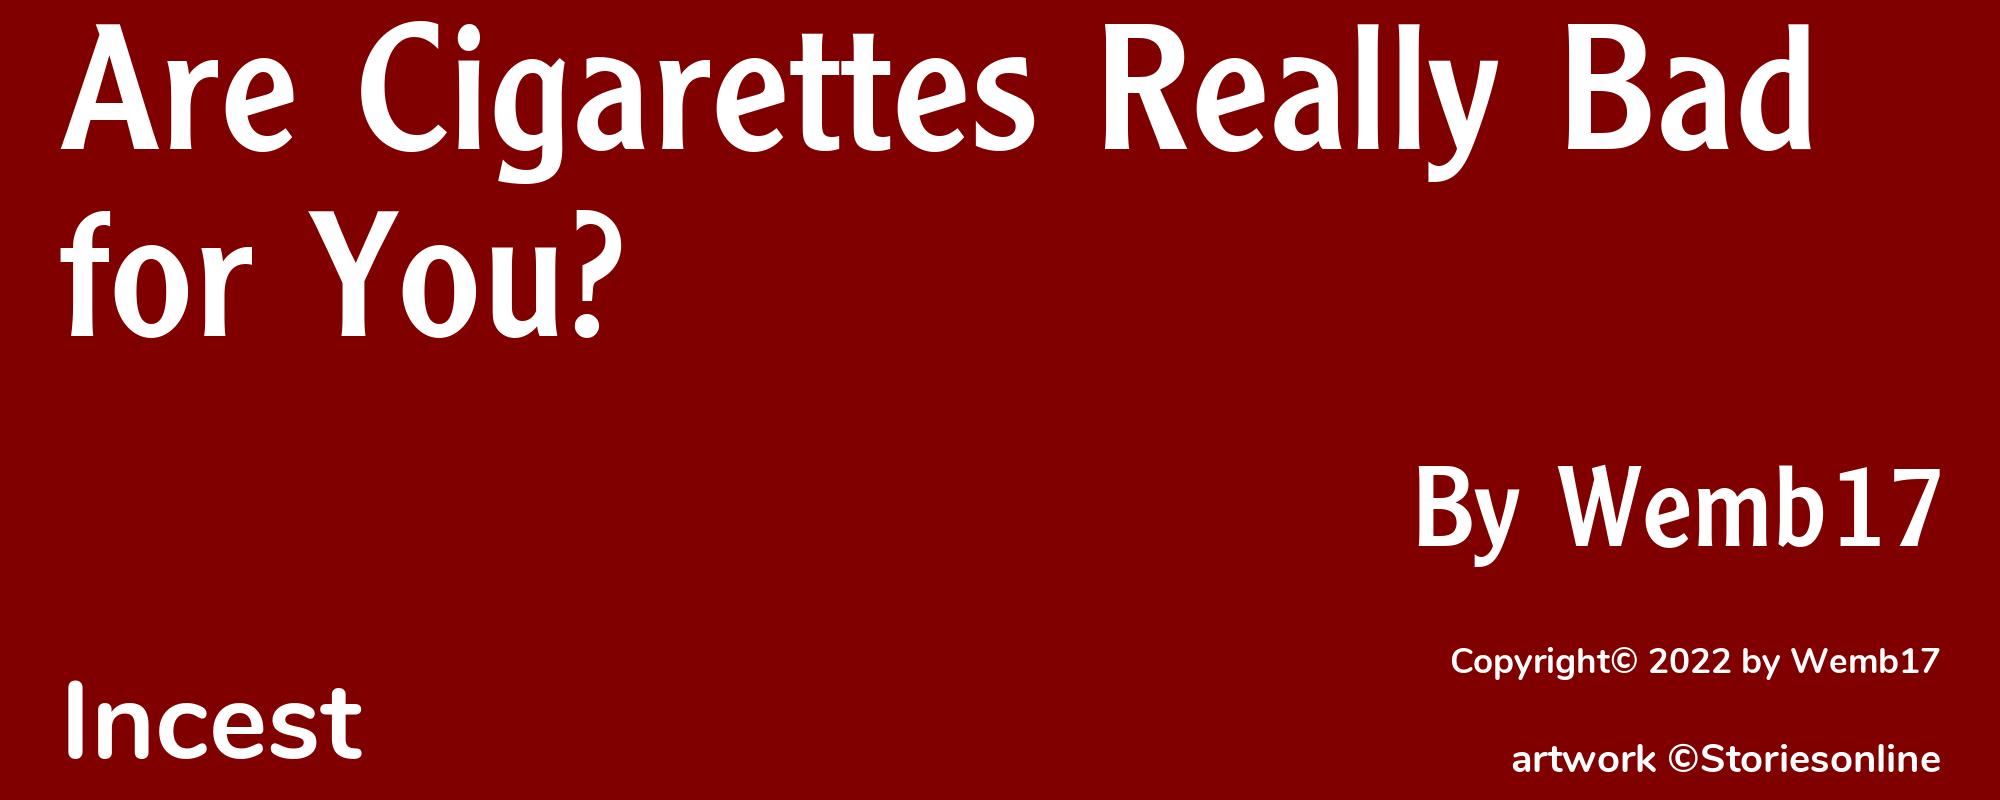 Are Cigarettes Really Bad for You? - Cover